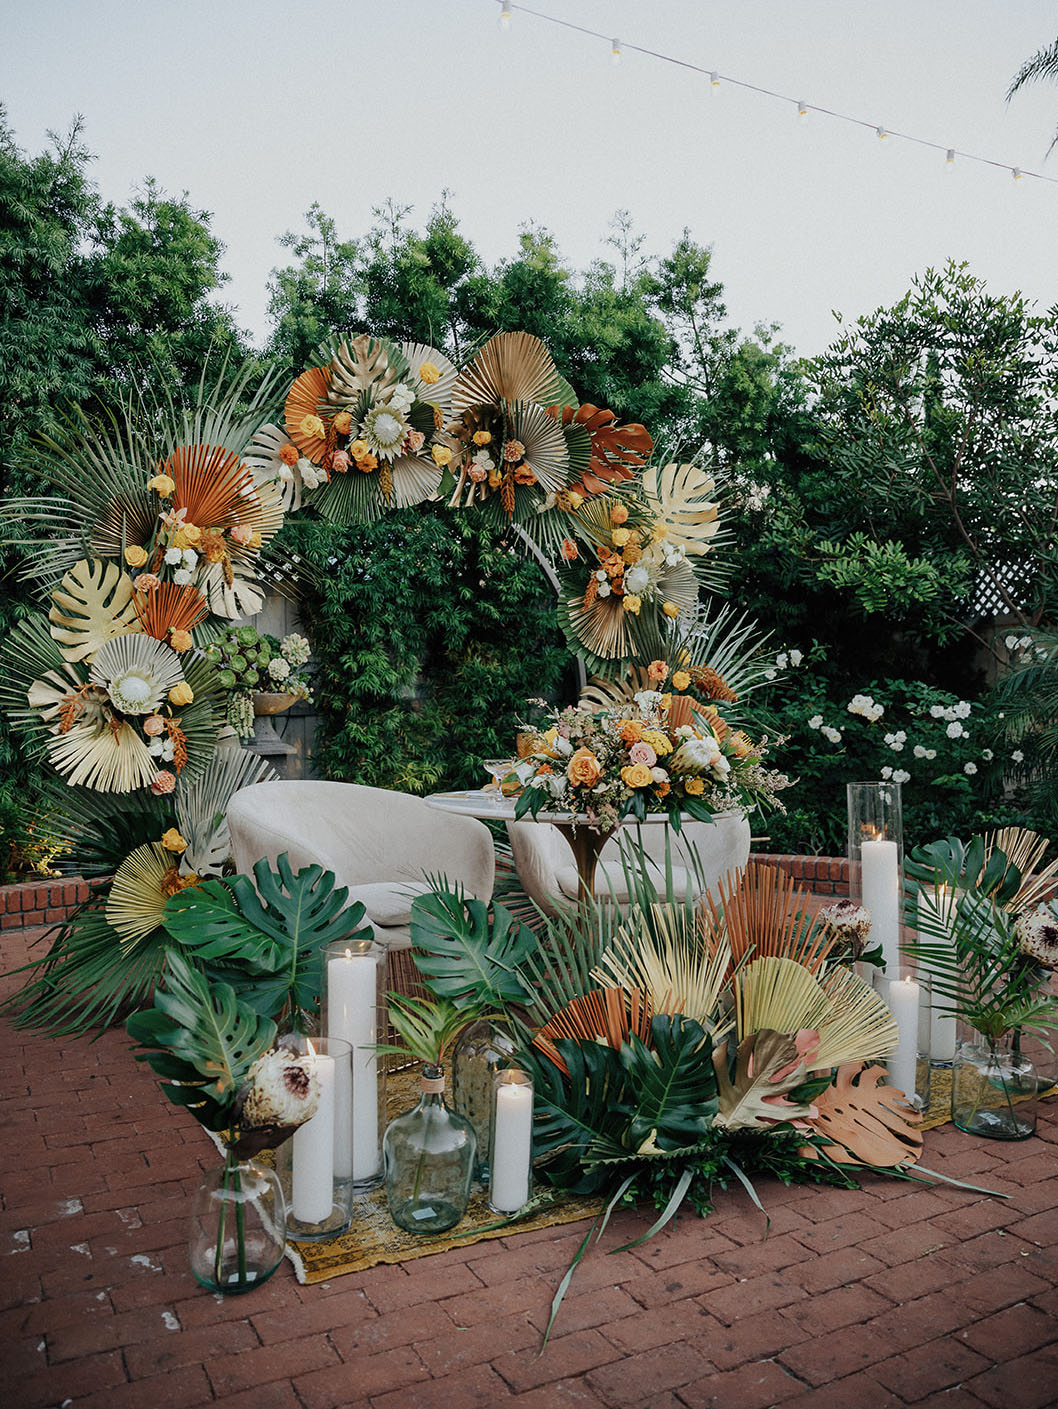 The wedding arch doubled as a backdrop for the wedding head table